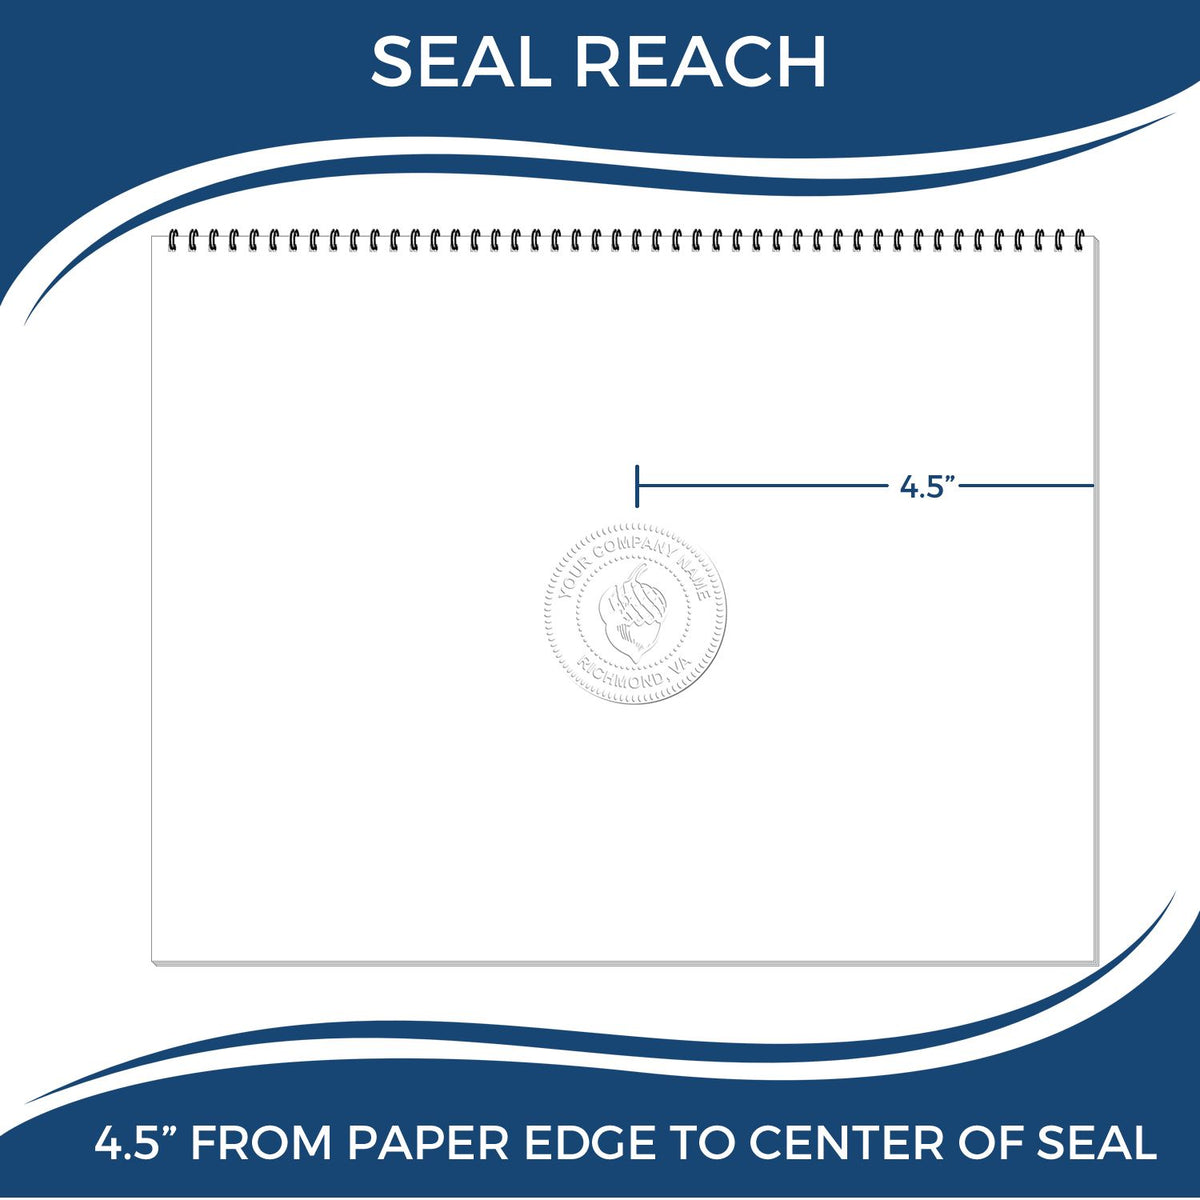 An infographic showing the seal reach which is represented by a ruler and a miniature seal image of the Extended Long Reach Nevada Architect Seal Embosser